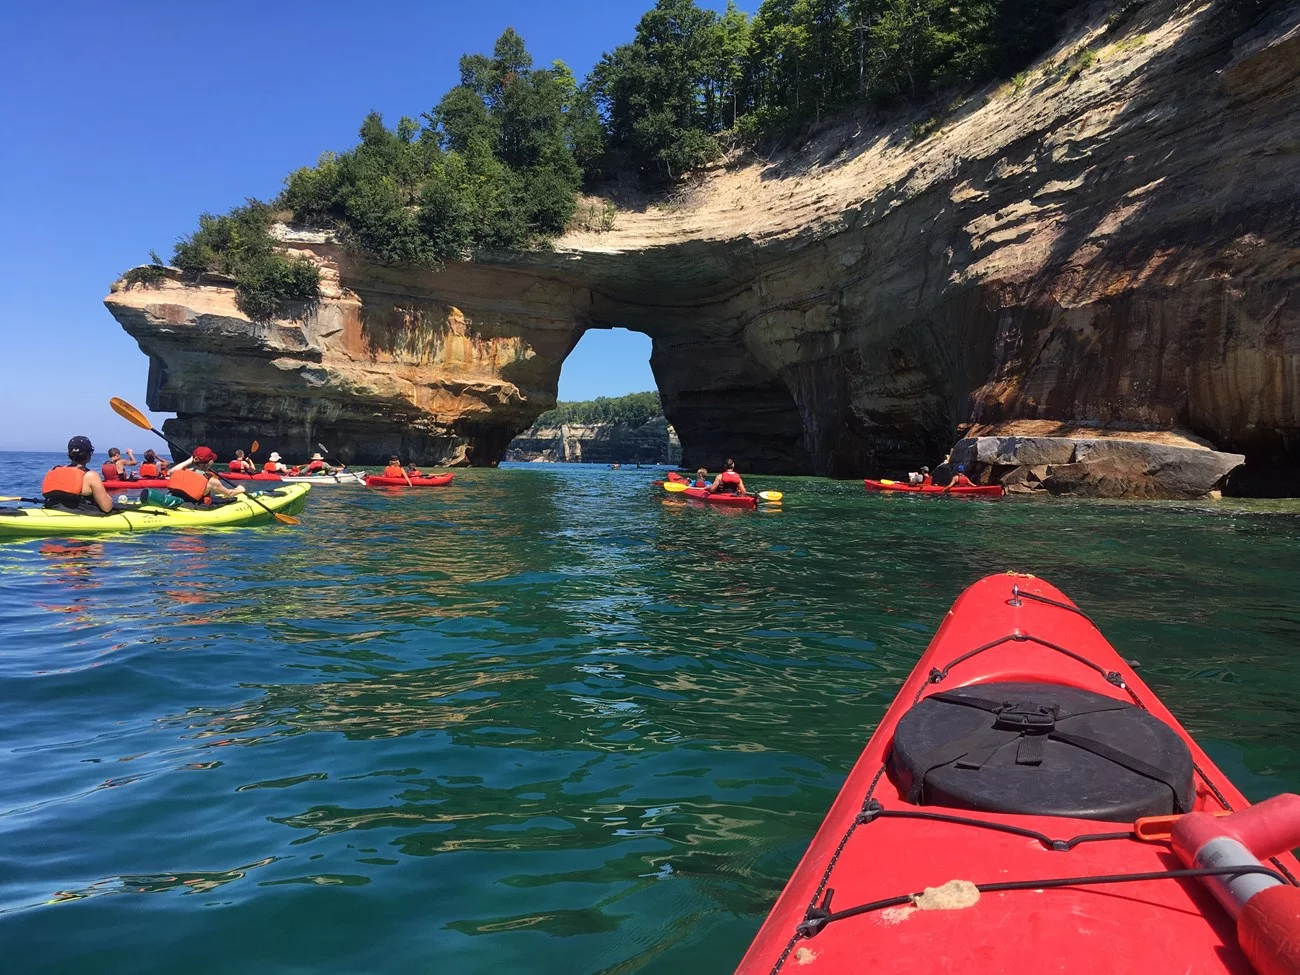 Pictured Rocks hike